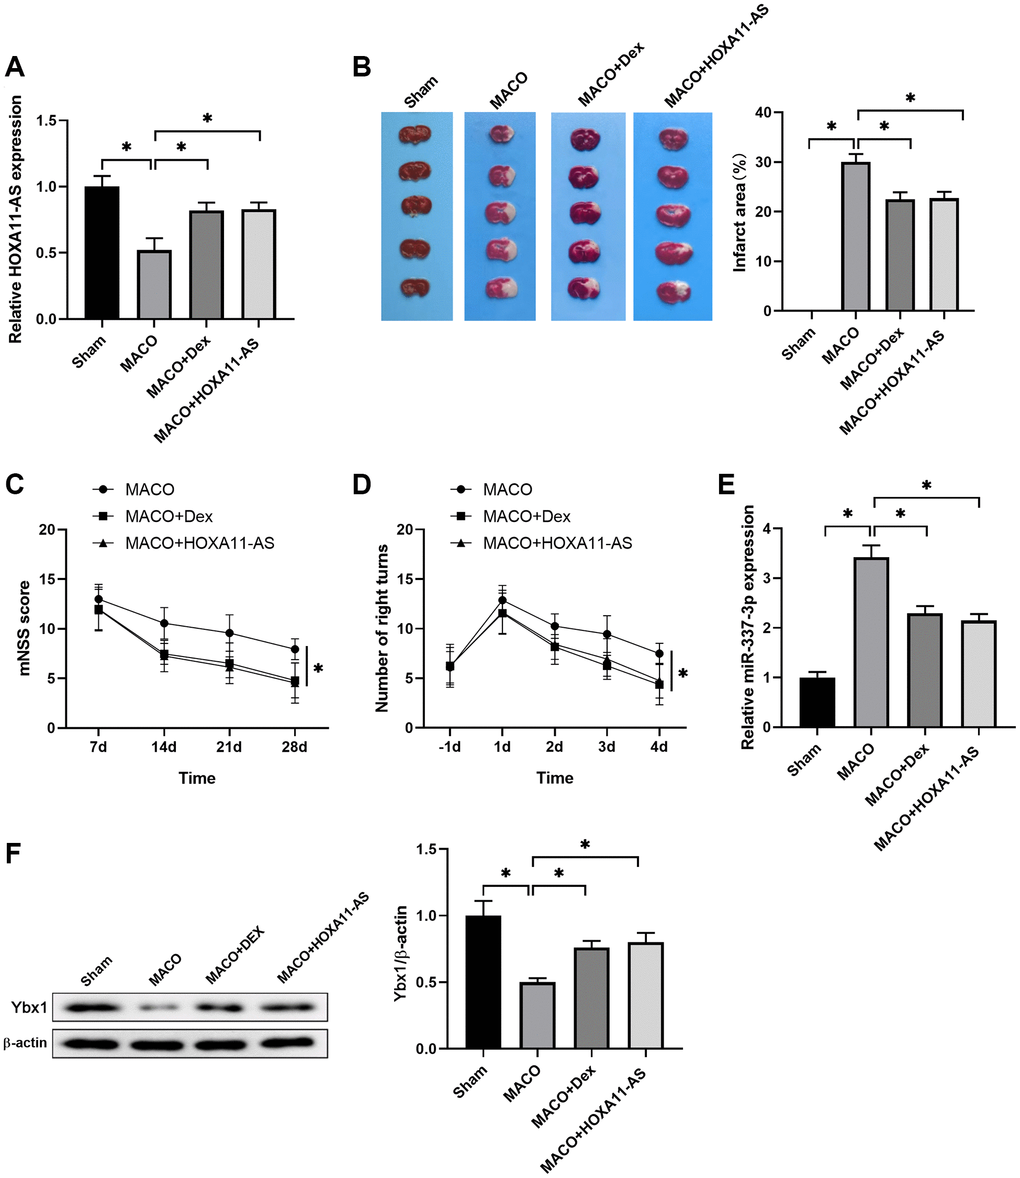 Dex/HOXA11-AS protected against ischemic damage and improved neurological deficits in vivo. (A) The expression of HOXA11-AS was determined by quantitative real-time PCR in mouse brain after MCAO and Dex/HOXA11-AS mimics treatments. n = 5 mice for each group. (B) Representative illustrations of cerebral sections by TTC staining. Infracted region was stained white. The infarction volume was evaluated as the percentage of infarct area relative to the whole brain. (C, D) mNSS score (C) and numbers of right turns in the Corner test (D) in the indicated groups were summarized. n = 5 mice for each group. (E) The expression of miR-337-3p was determined by quantitative real-time PCR in mouse brain after MCAO and Dex/HOXA11-AS mimics treatments. n = 5 mice for each group. (F) The levels of Ybx1 in mouse brain after MCAO and Dex/HOXA11-AS mimics treatments were determined by western blot. n = 3 for each group. *P 